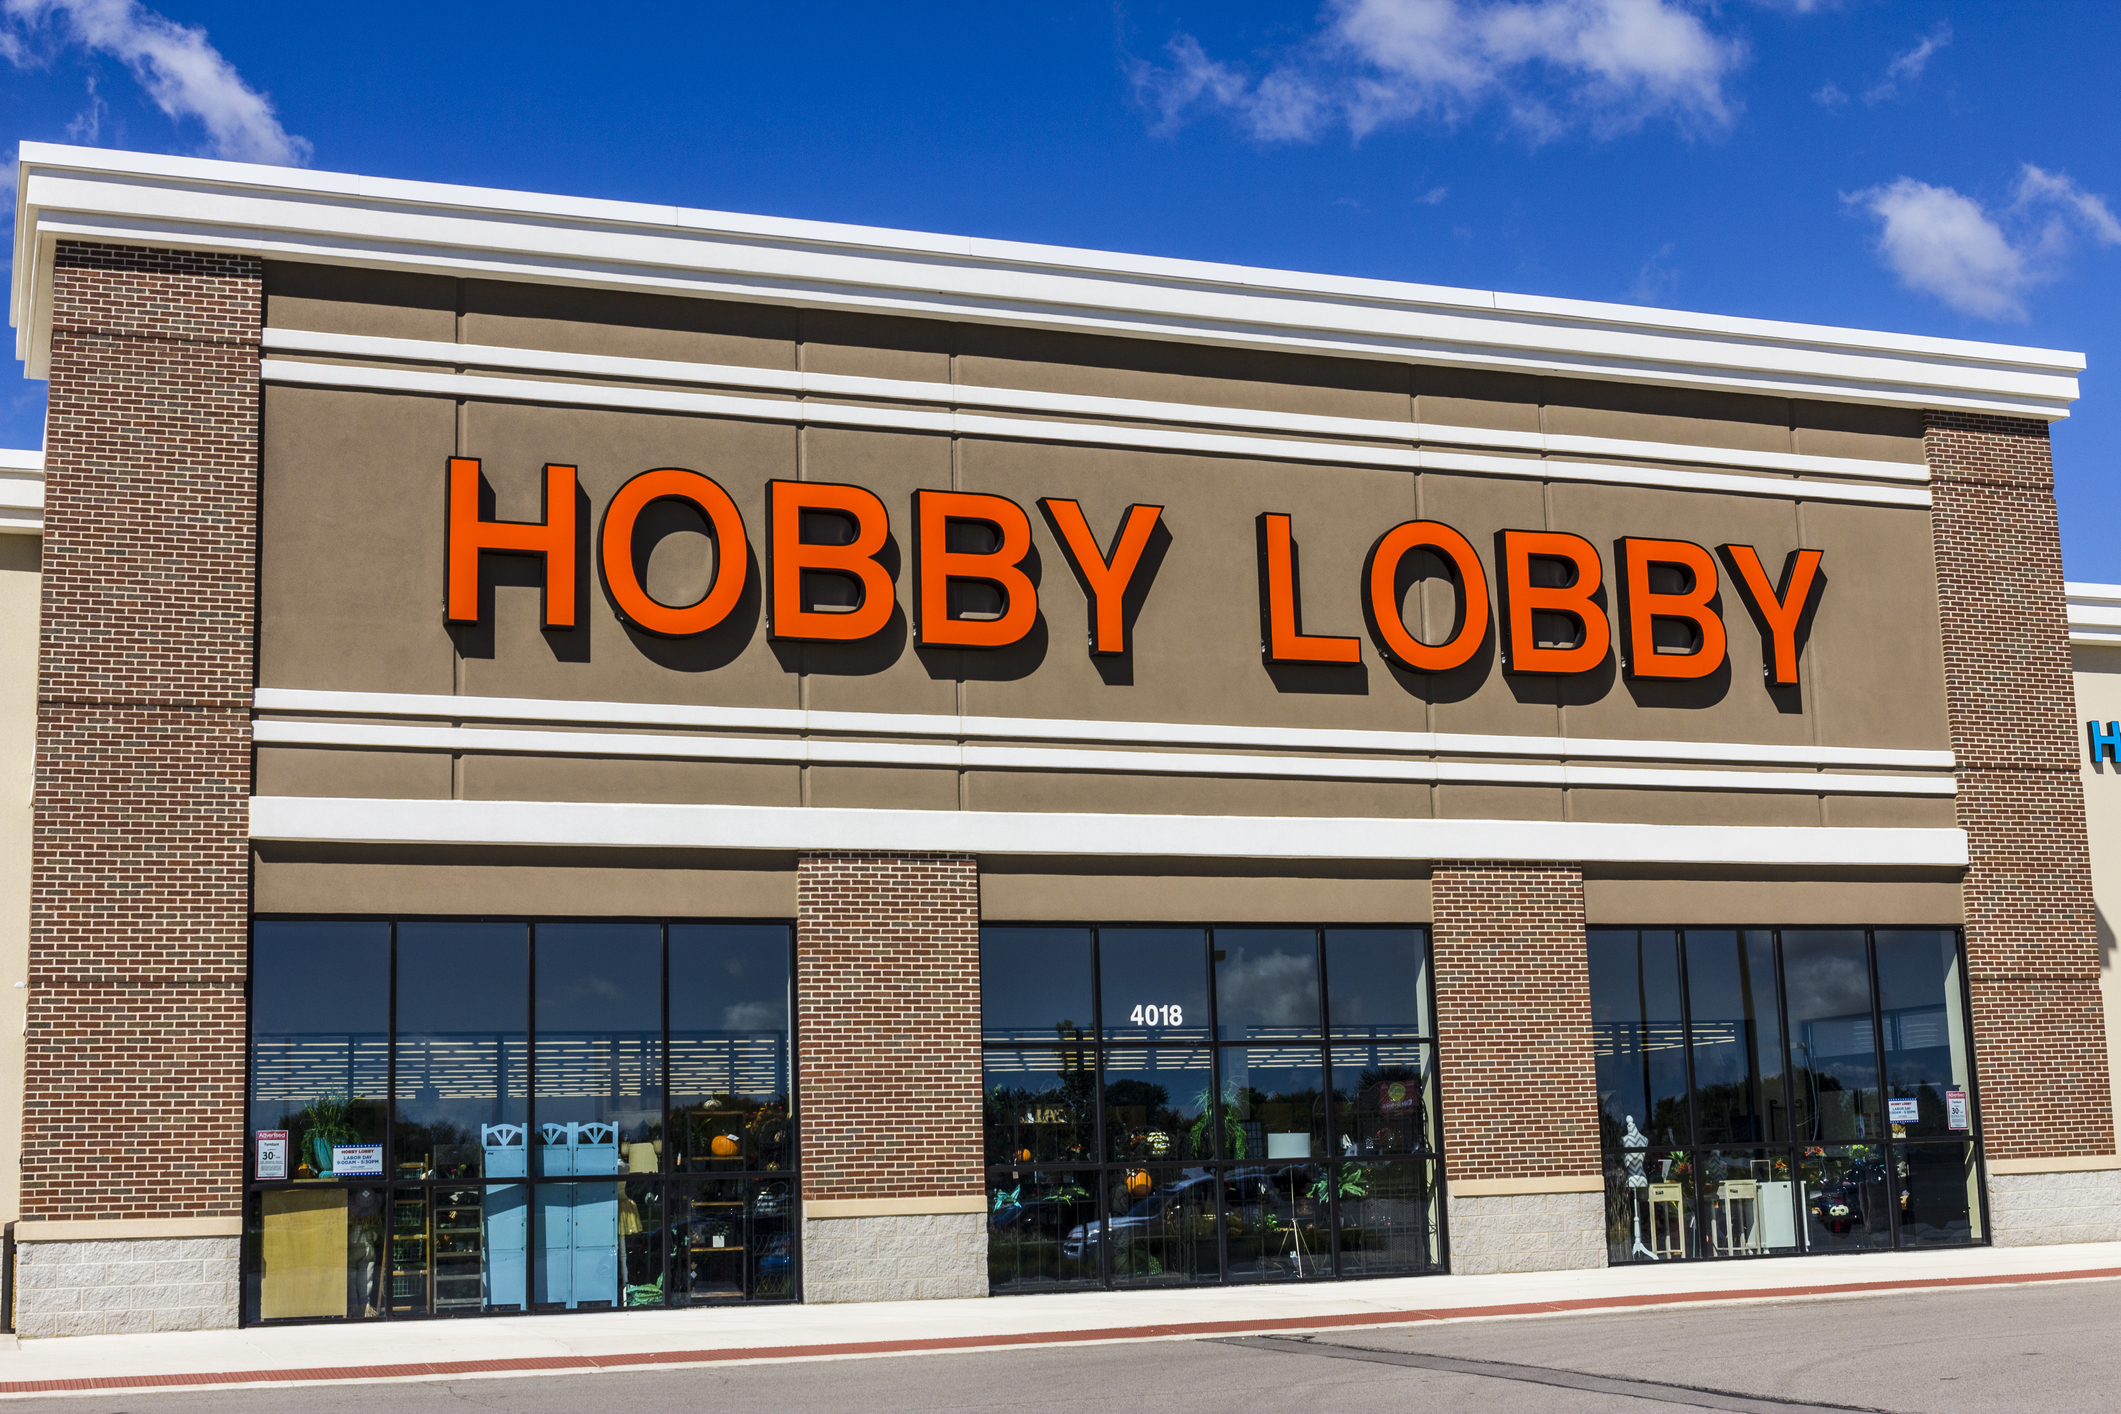 Save 40% on one regularly priced item at Hobby Lobby